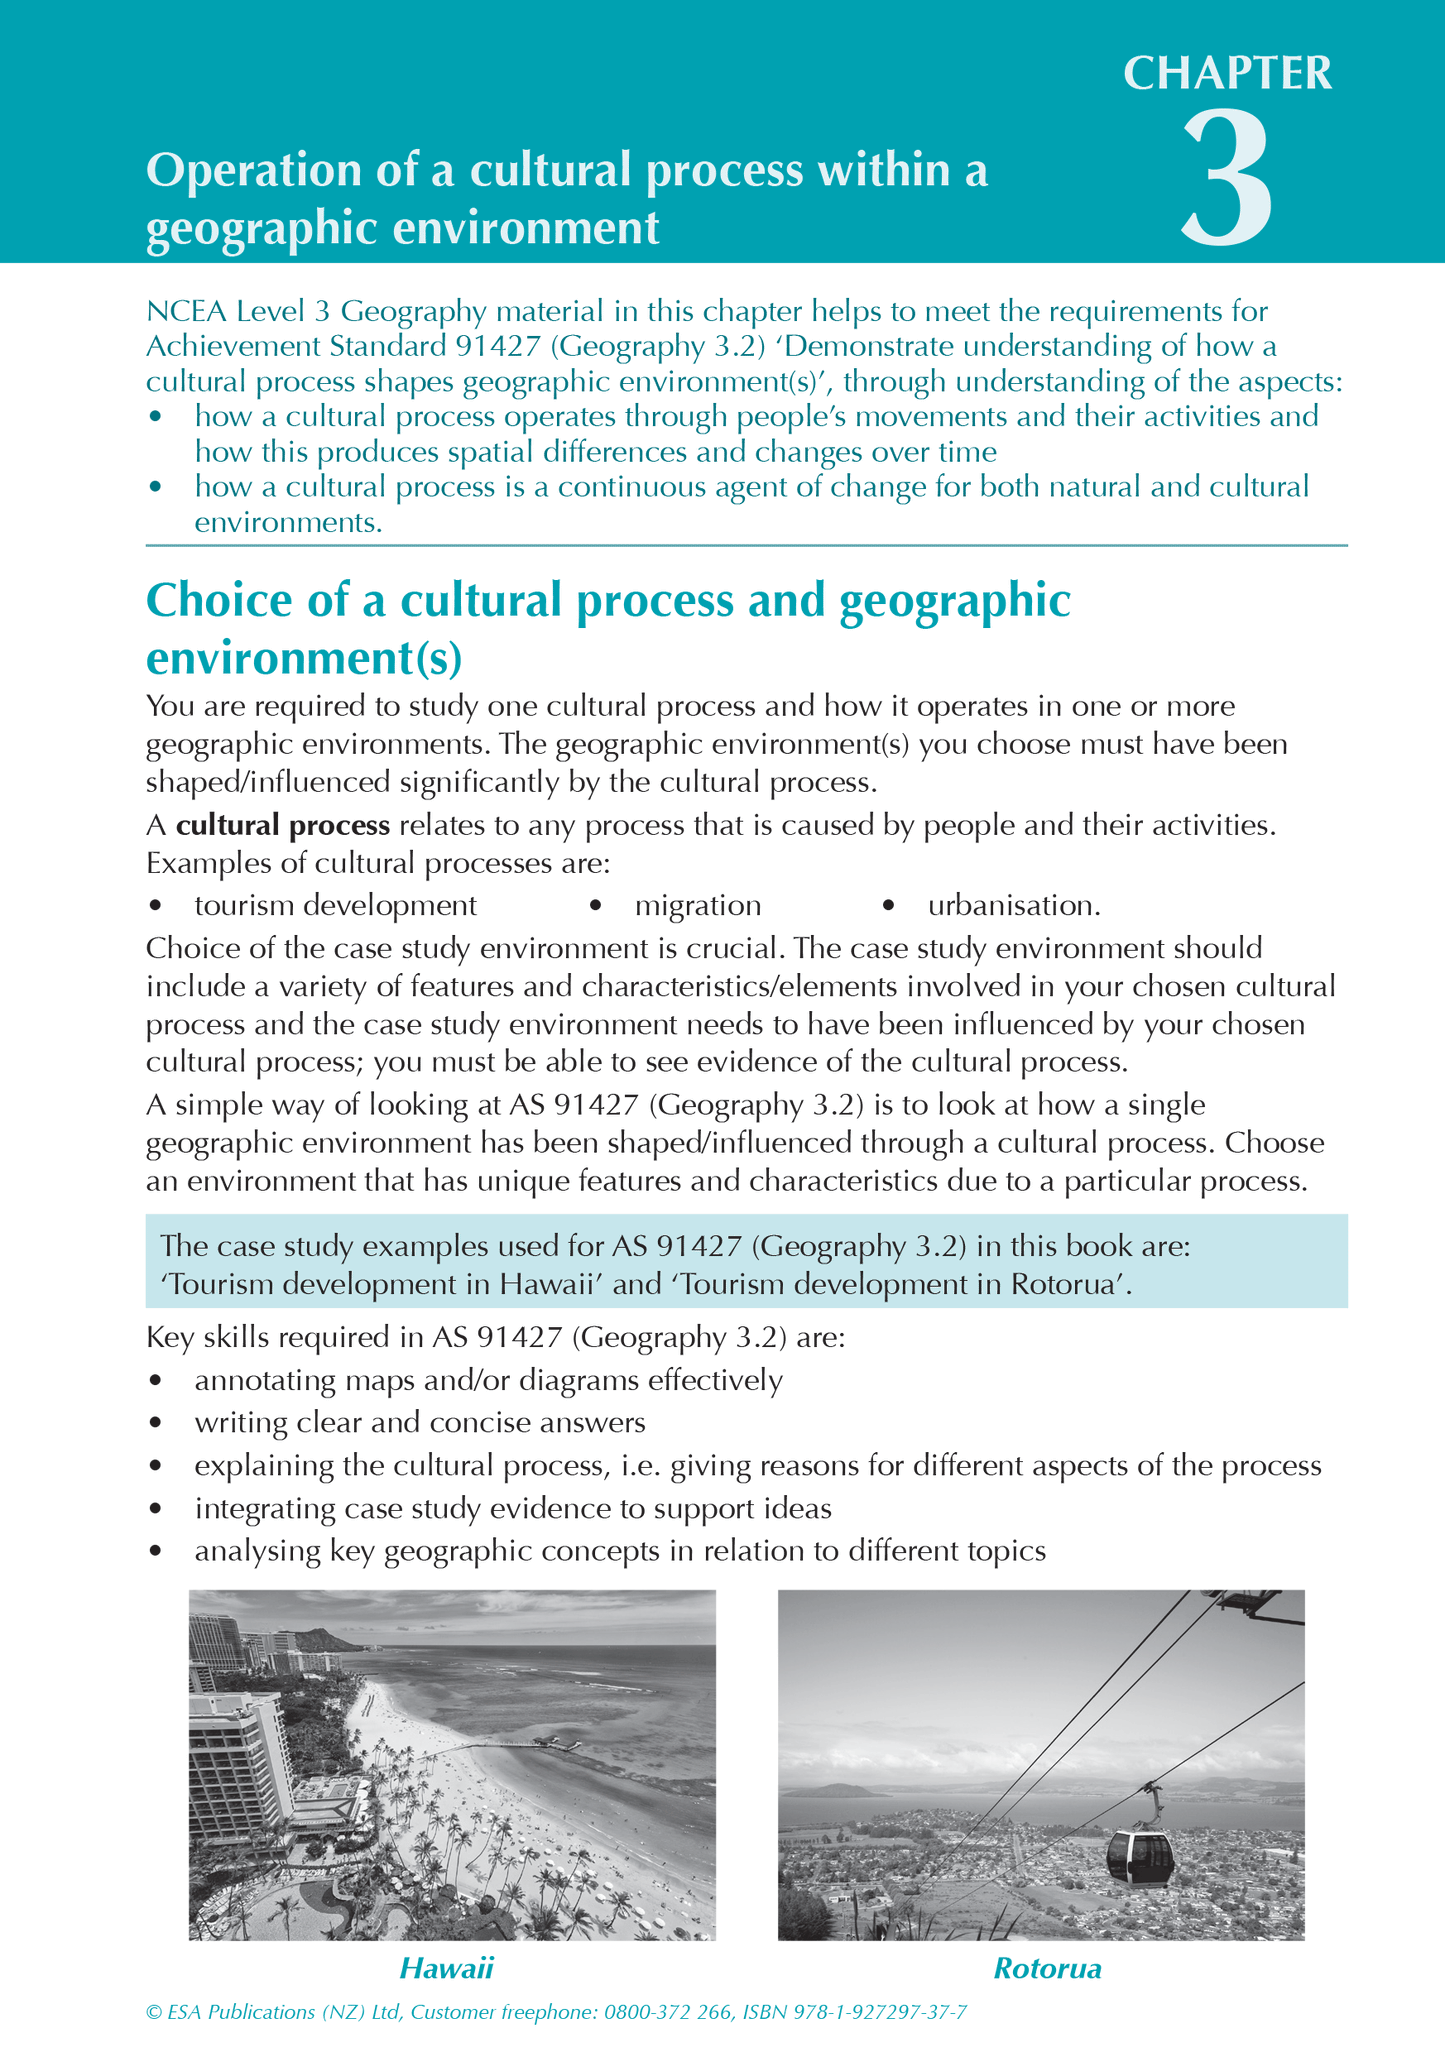 Level 3 Geography ESA Study Guide